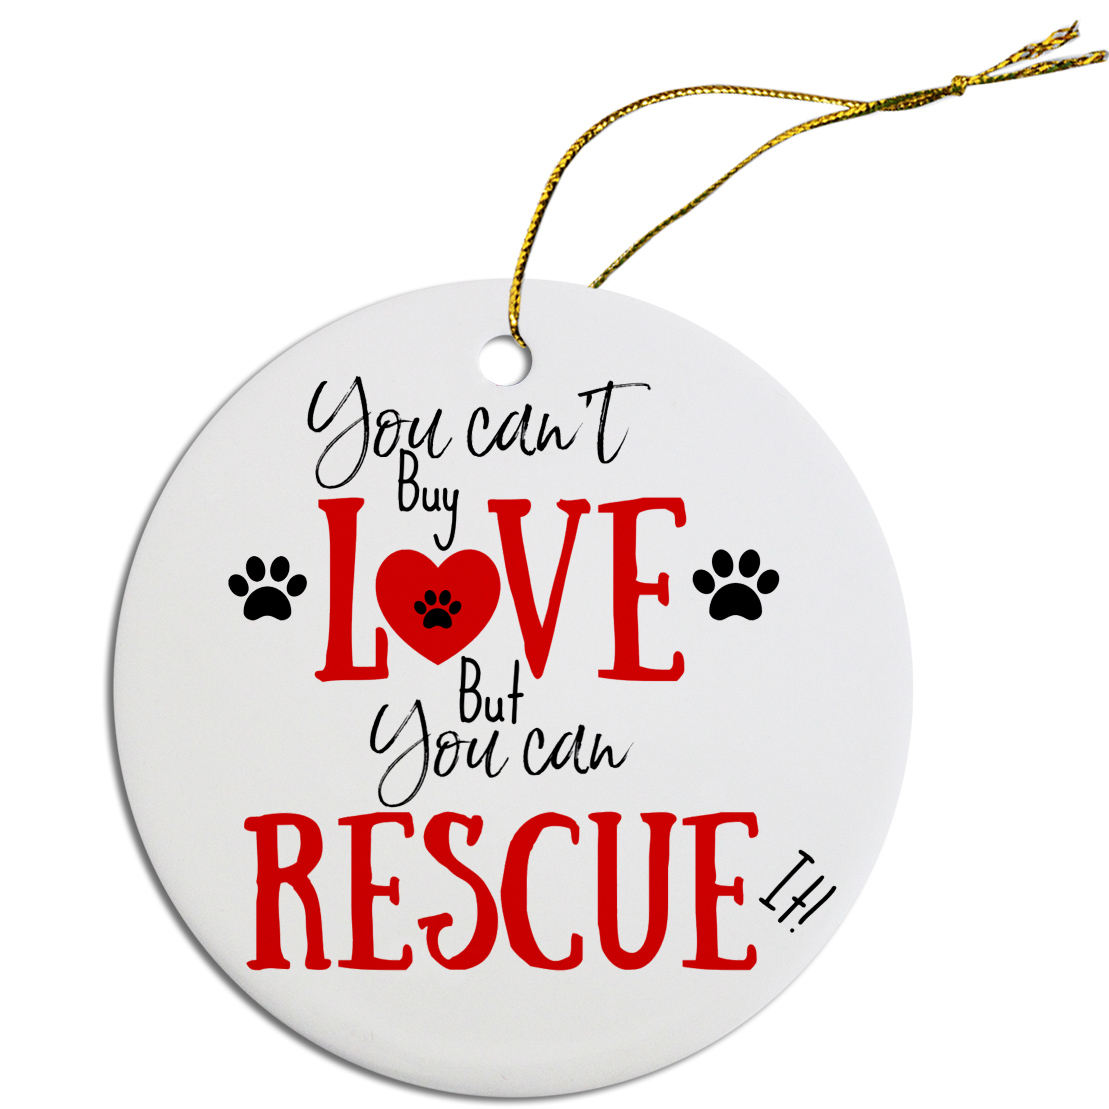 Round Christmas Ornament Can't Buy Love, can Rescue It